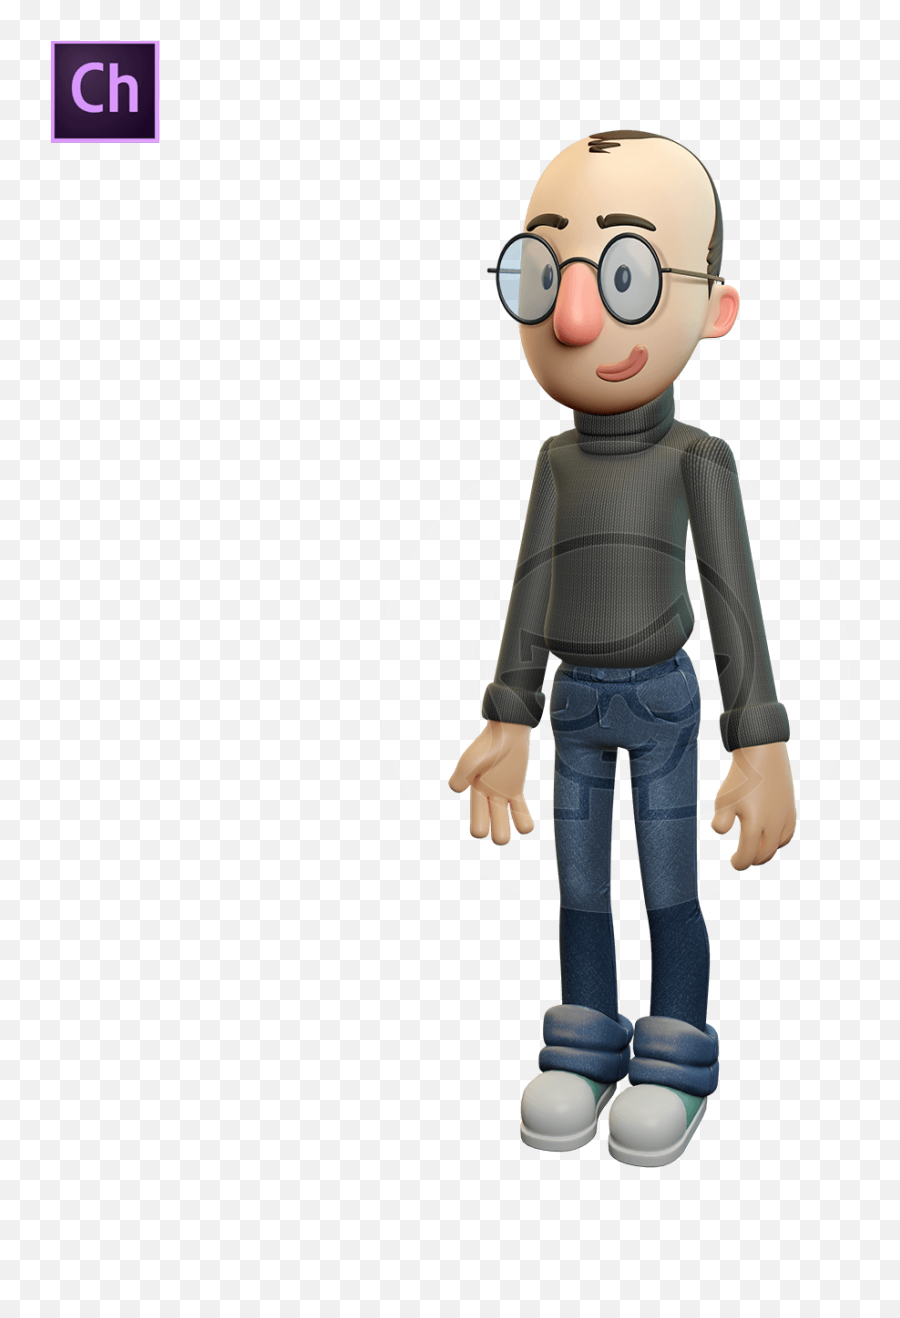 3d Man With Glasses Adobe Character Animator Puppet Graphicmama Emoji,Happy Emotion Poses Character 3d